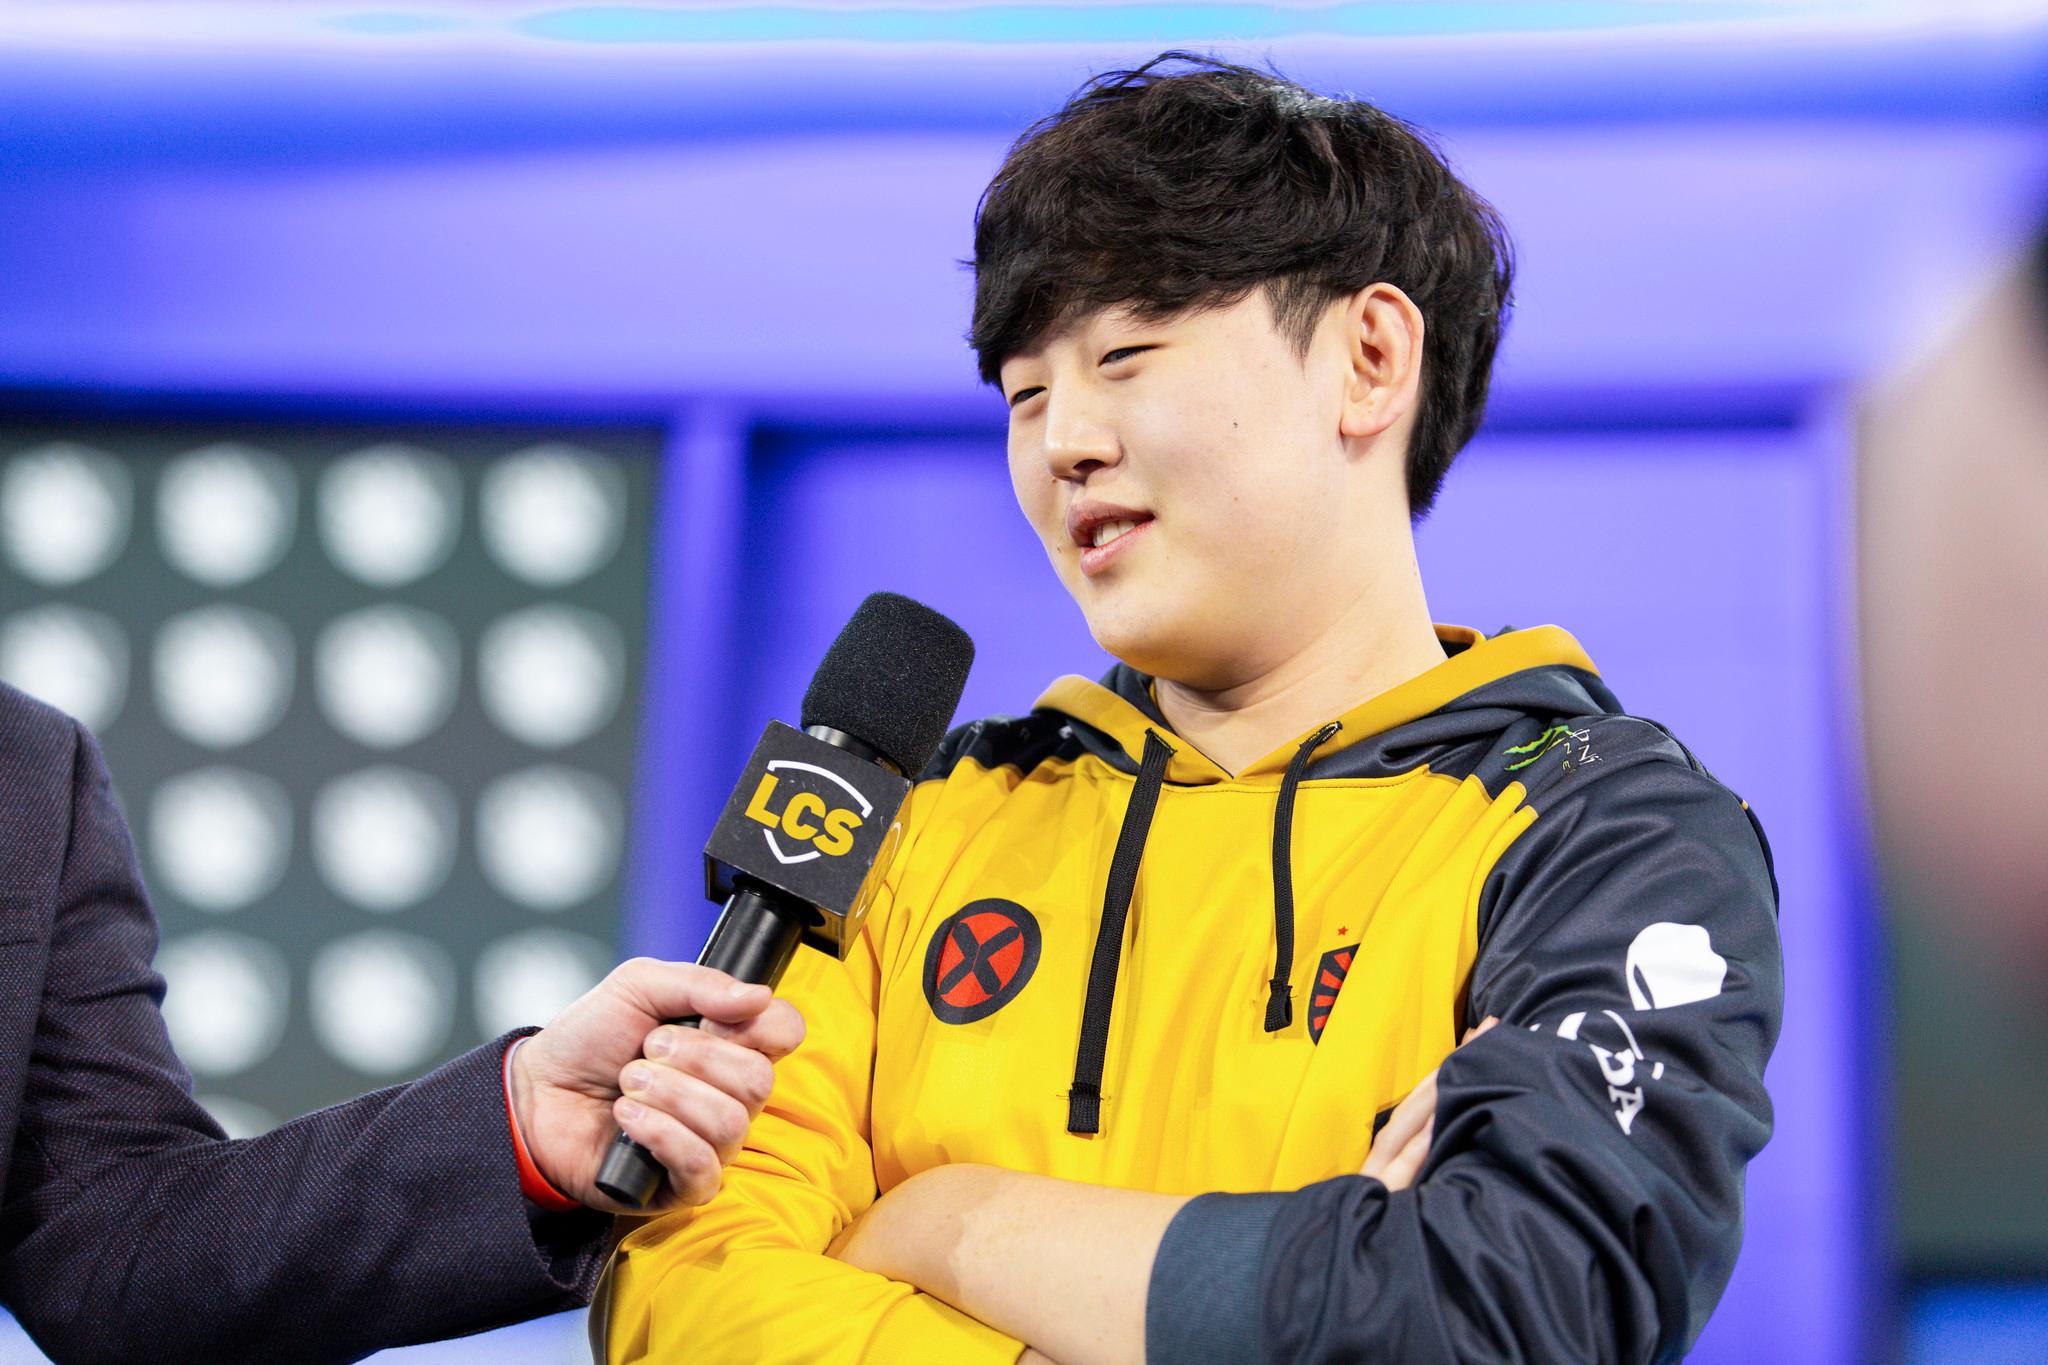 Tactical interviewed on the LCS stage after replacing Doublelift